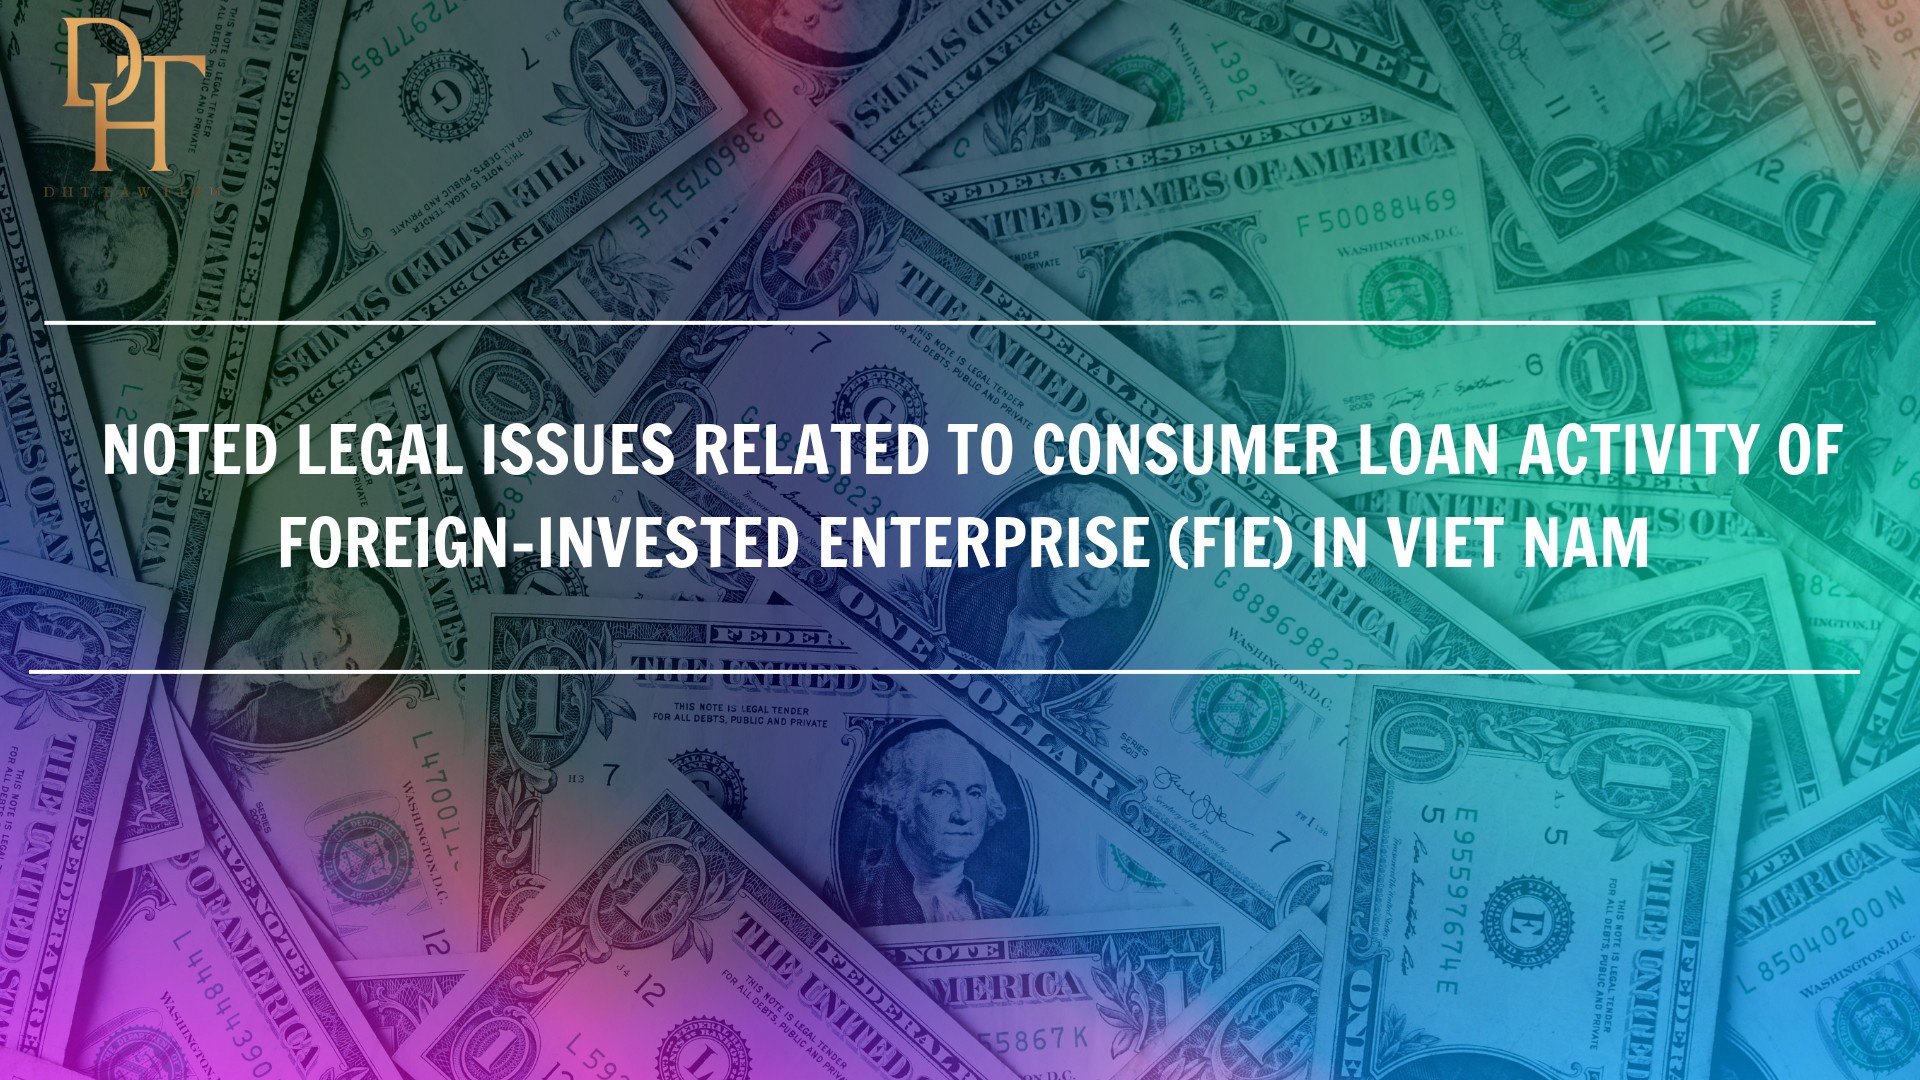 NOTED LEGAL ISSUES RELATED TO CONSUMER LOAN ACTIVITY OF FOREIGN-INVESTED ENTERPRISES (FIE) IN VIET NAM